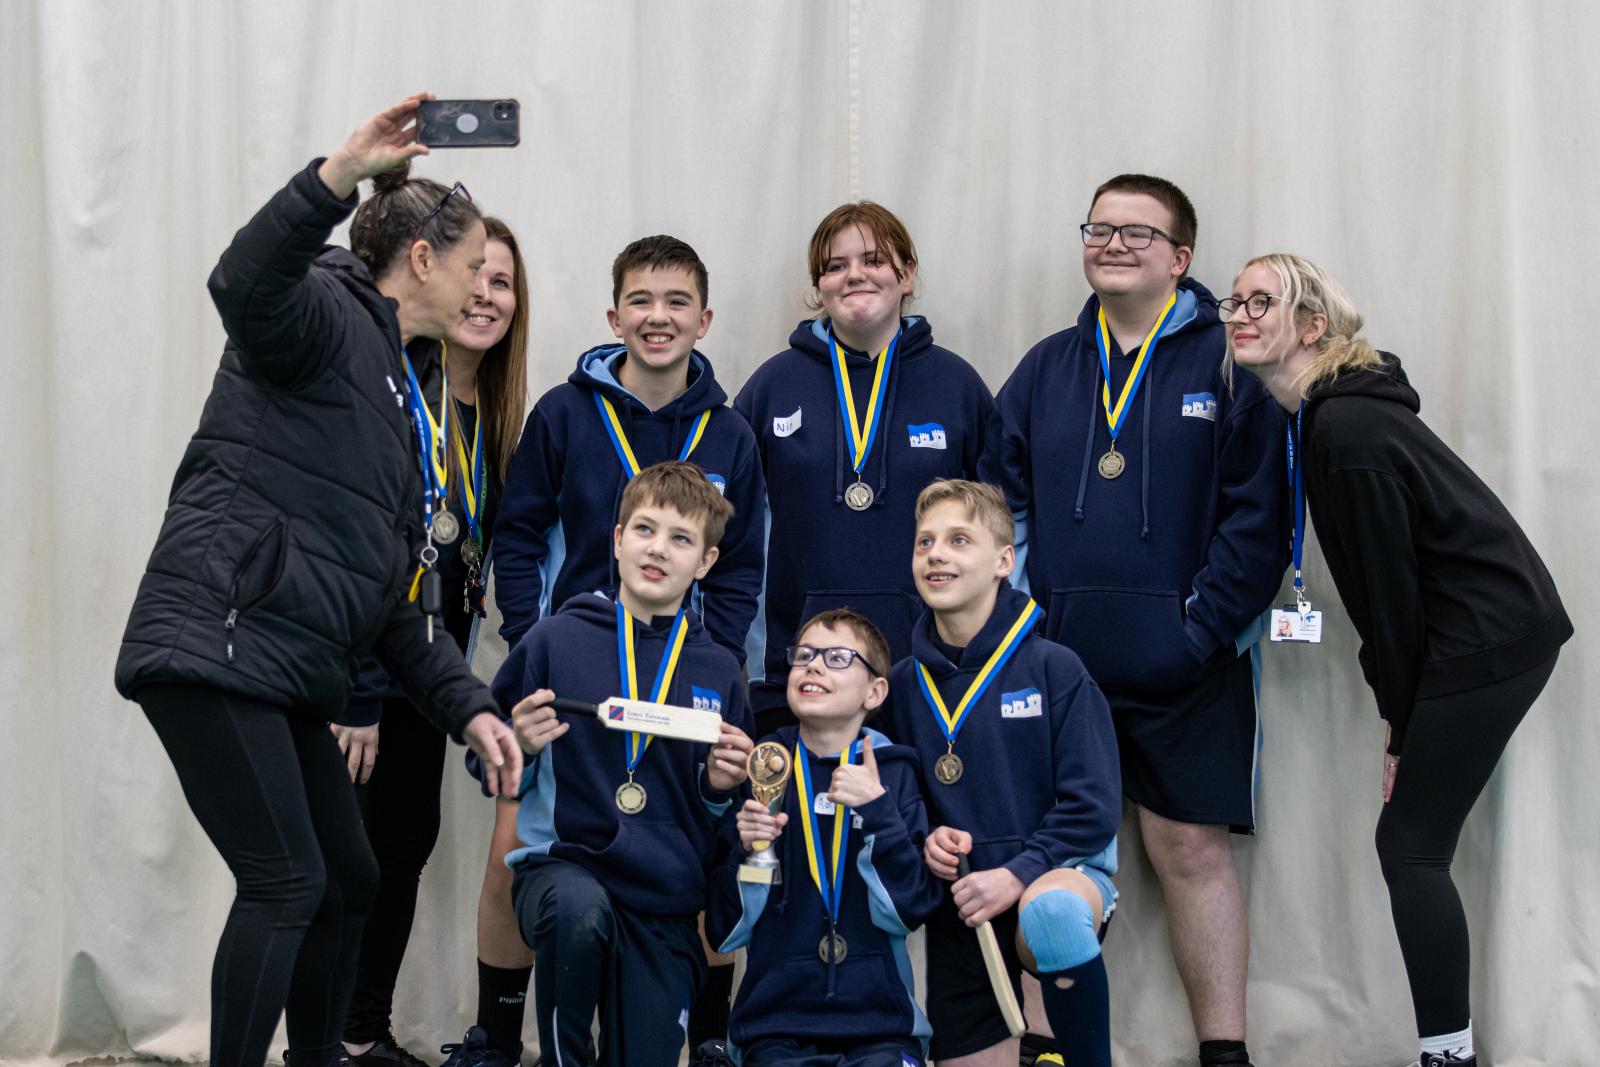 St James School celebrate being crowned County Table Cricket champions.